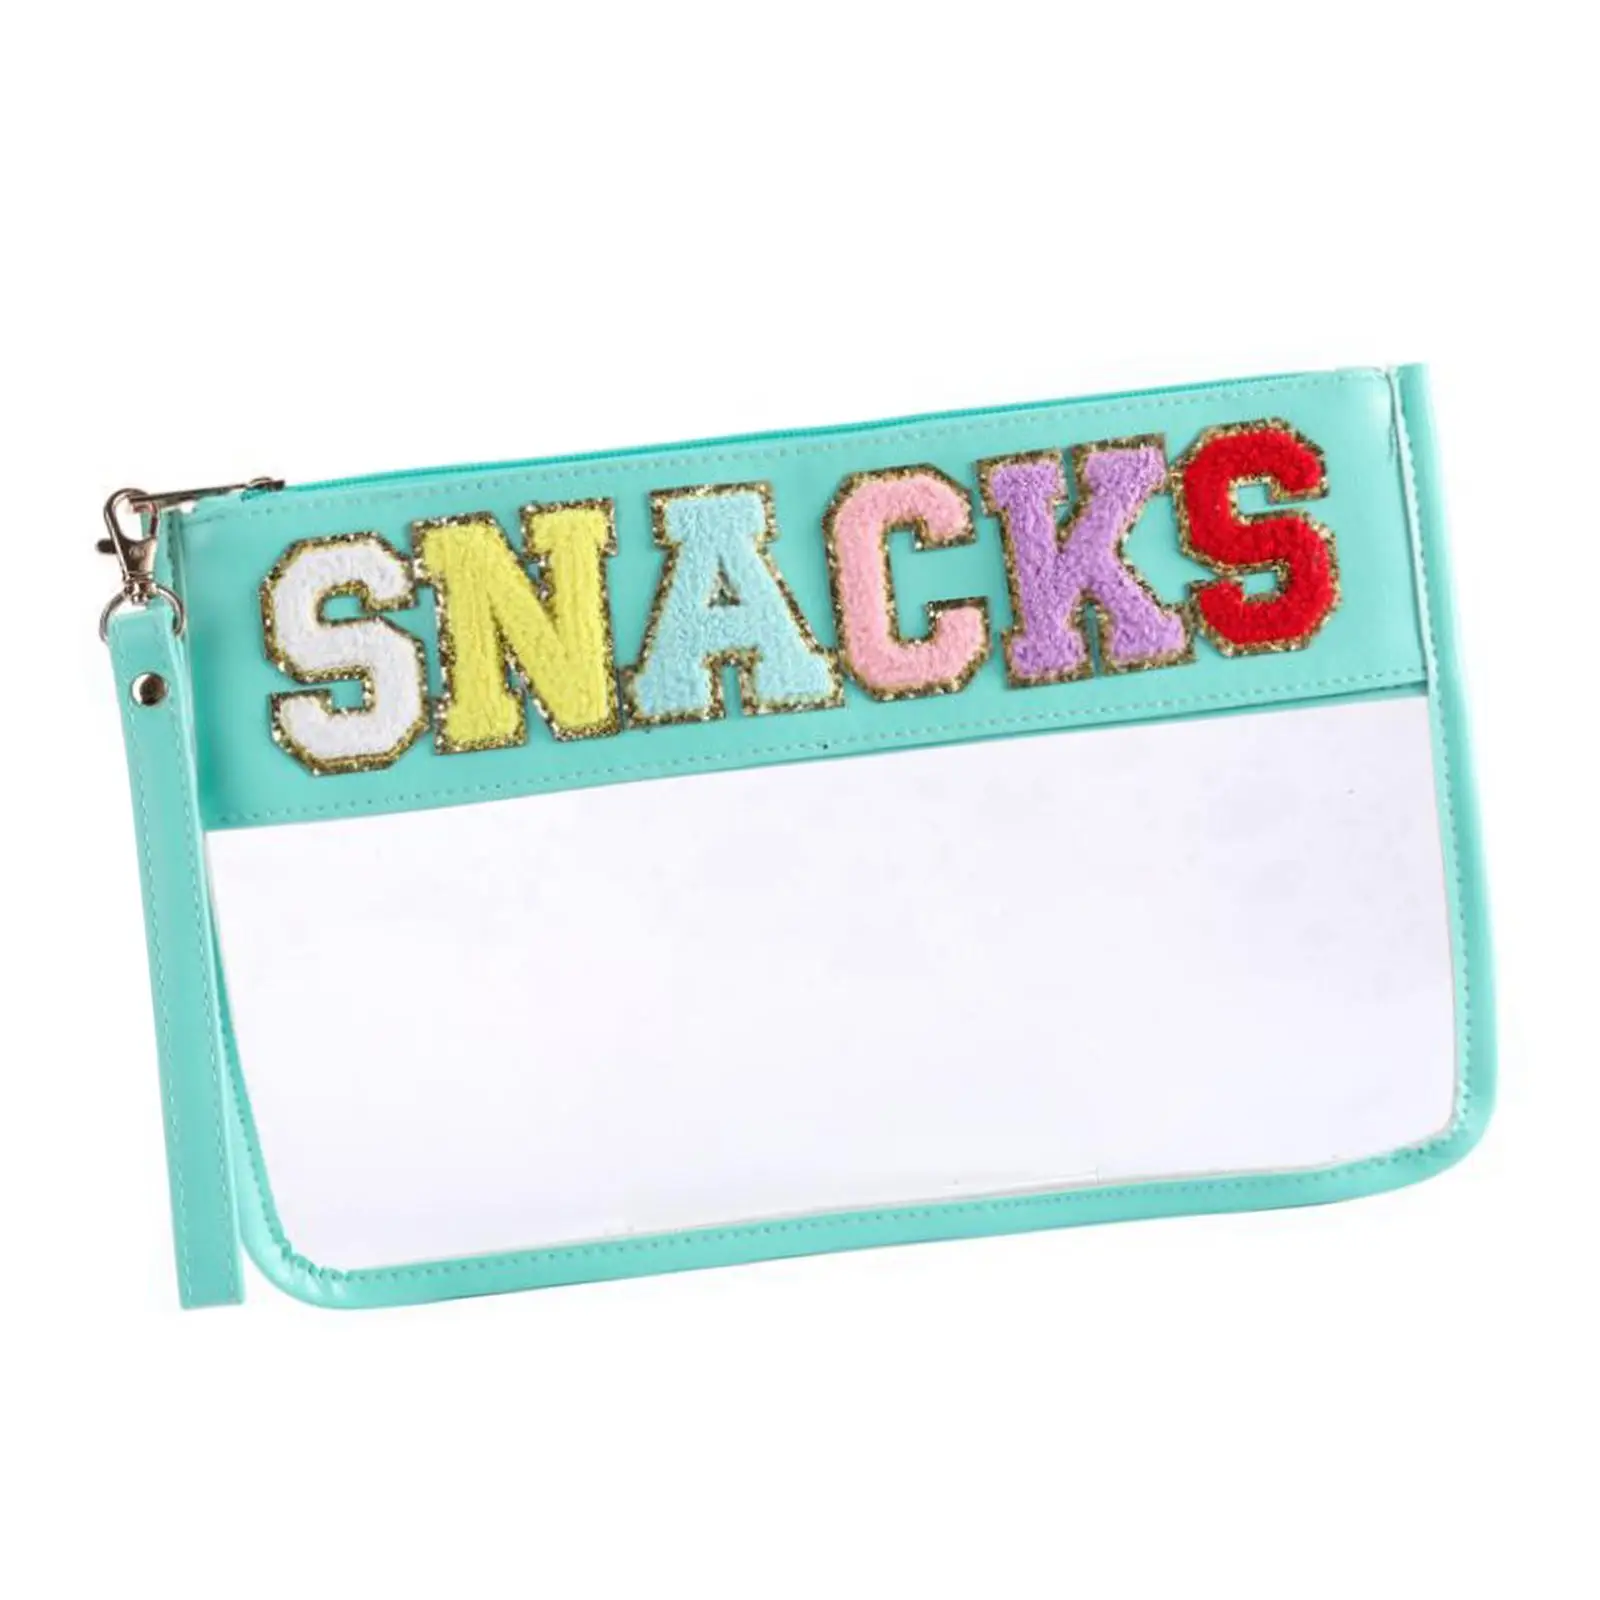 Travel Toiletry Bag Multifunctional Holder Lightweight Travel Bag Reusable Pouch Snack Bag Bathroom Accessories Clear Makeup Bag